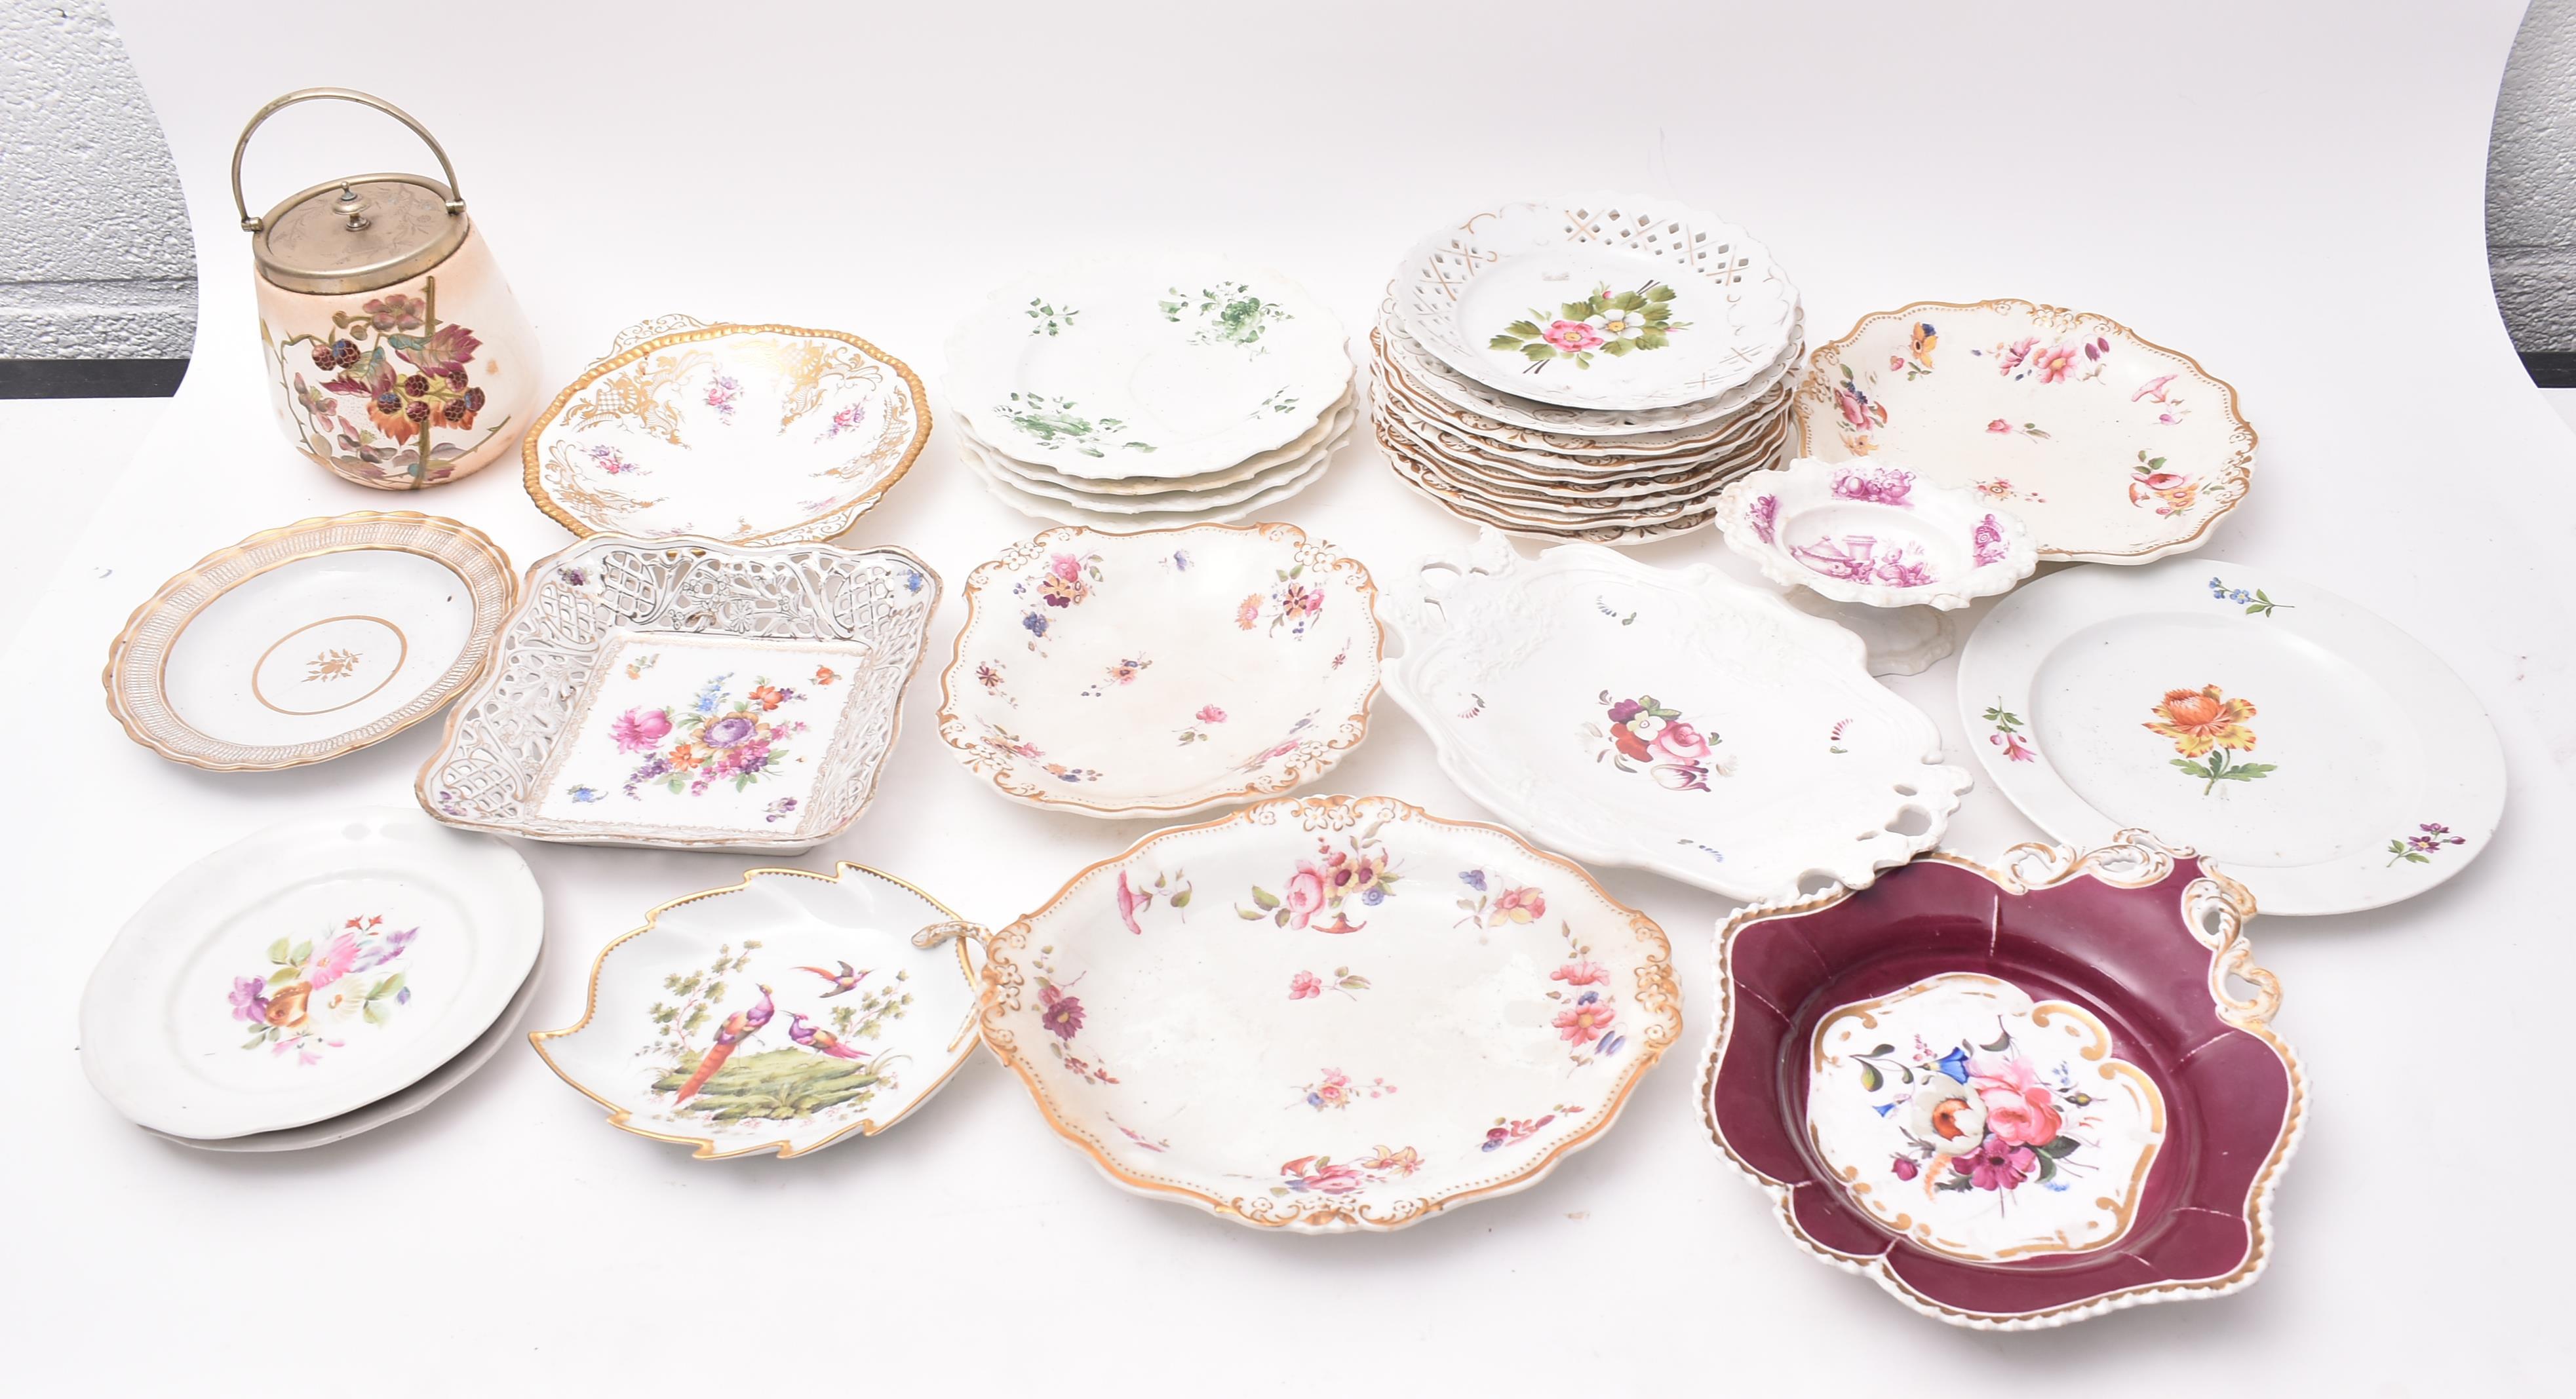 COLLECTION OF LATE VICTORIAN DECORATIVE PORCELAIN